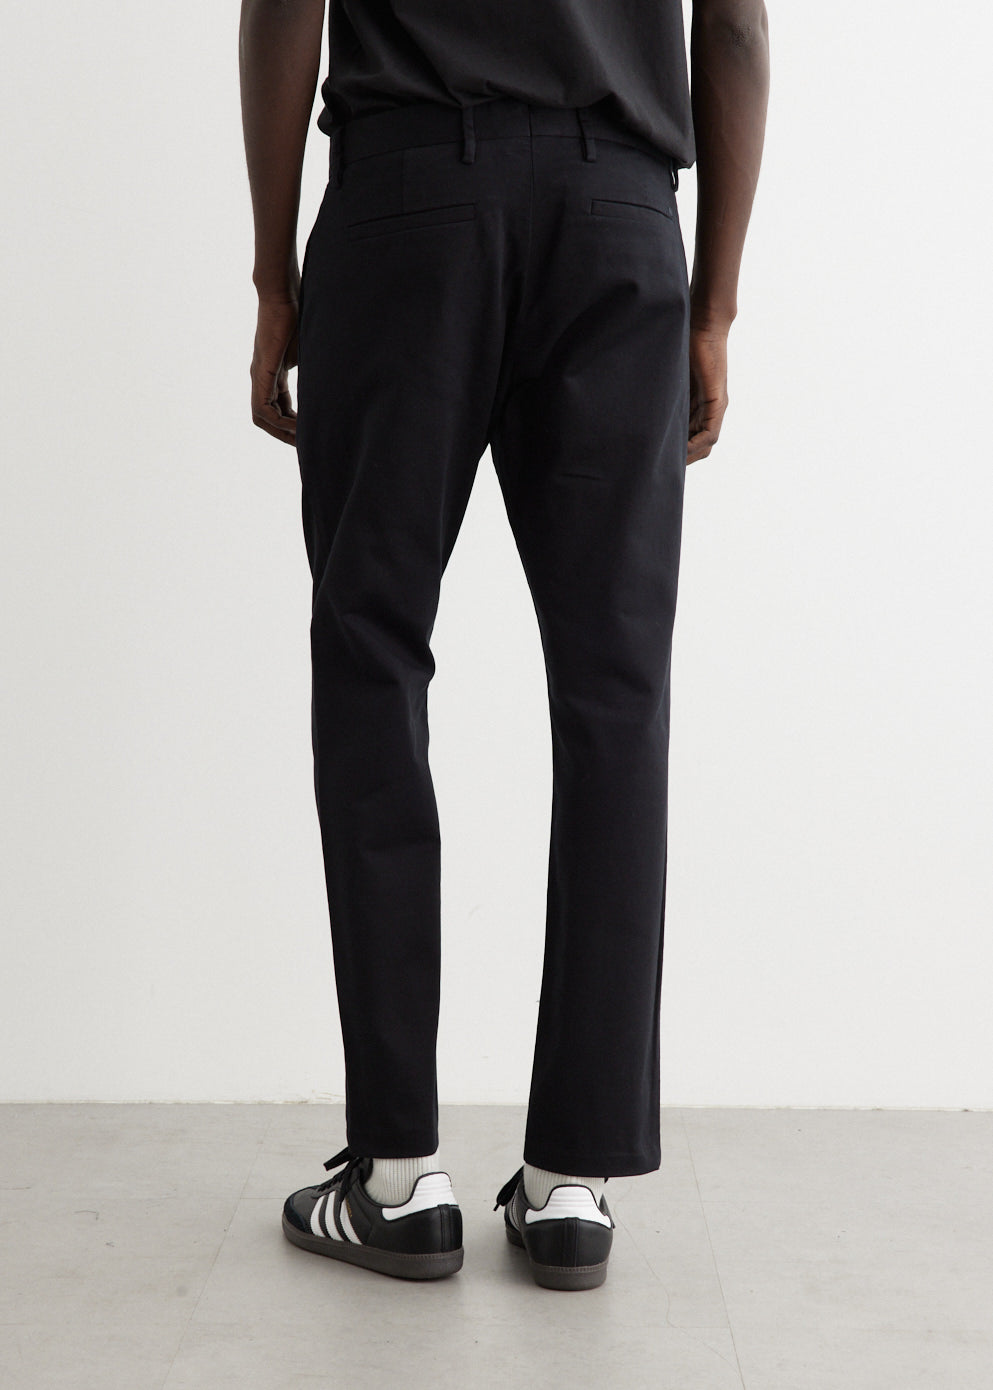 Clement Trousers